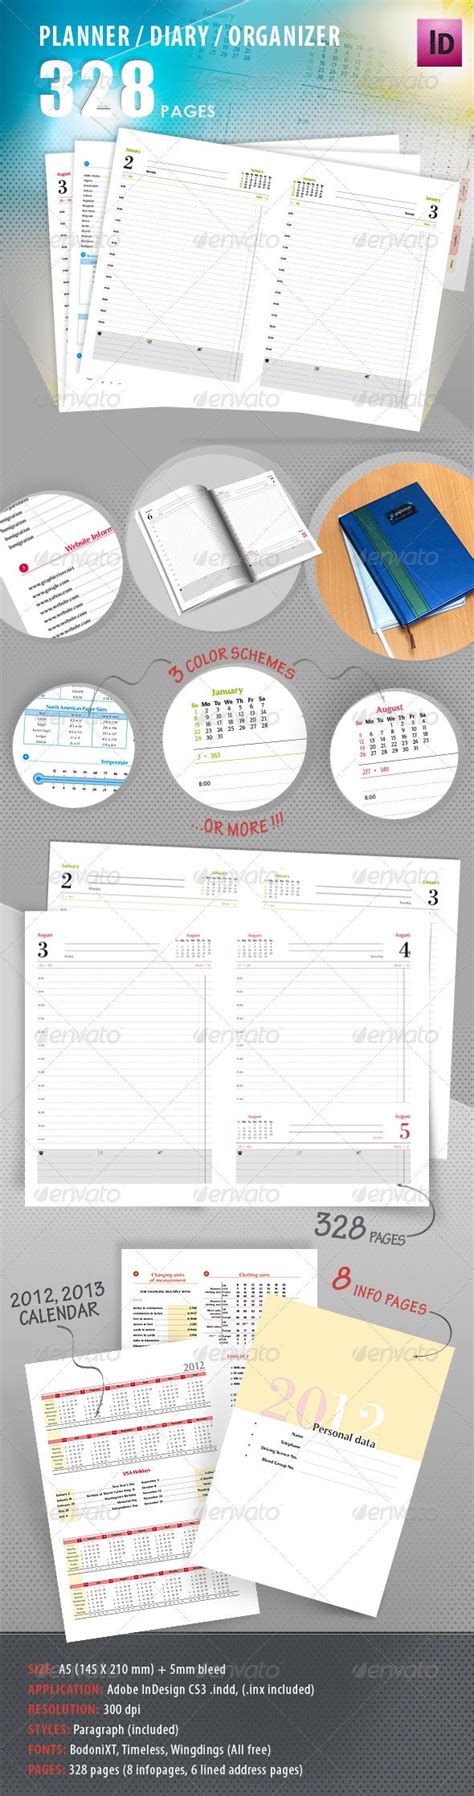 Planner Diary Organizer By Leroiv Graphicriver